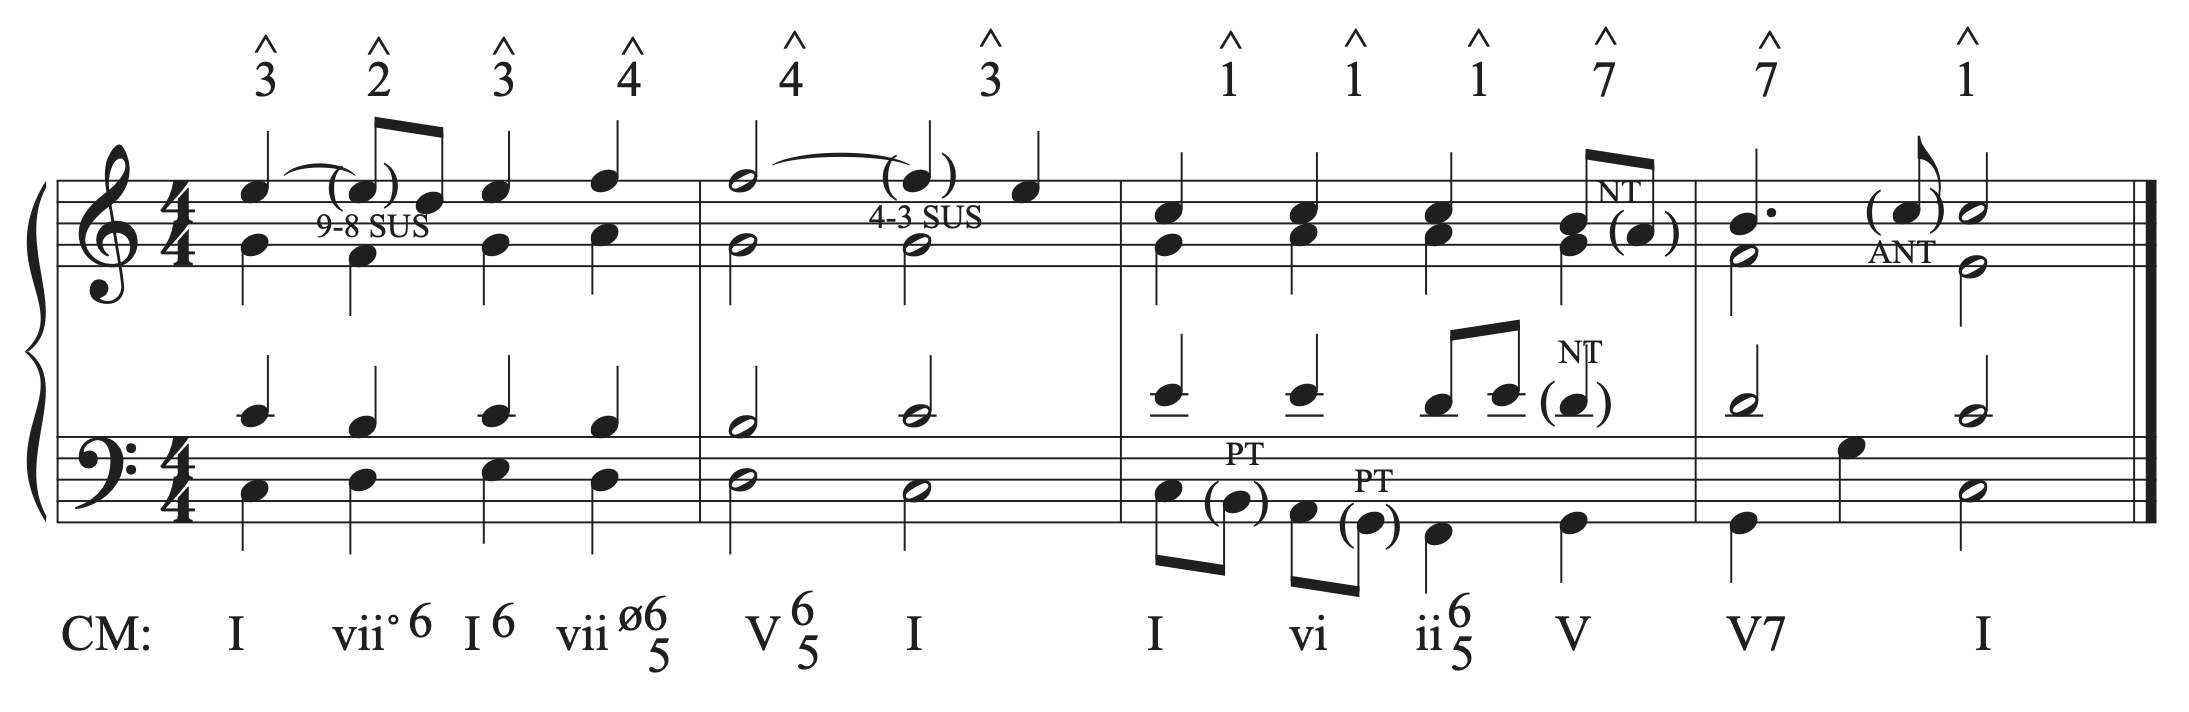 The musical example in C major with an anticipation added.